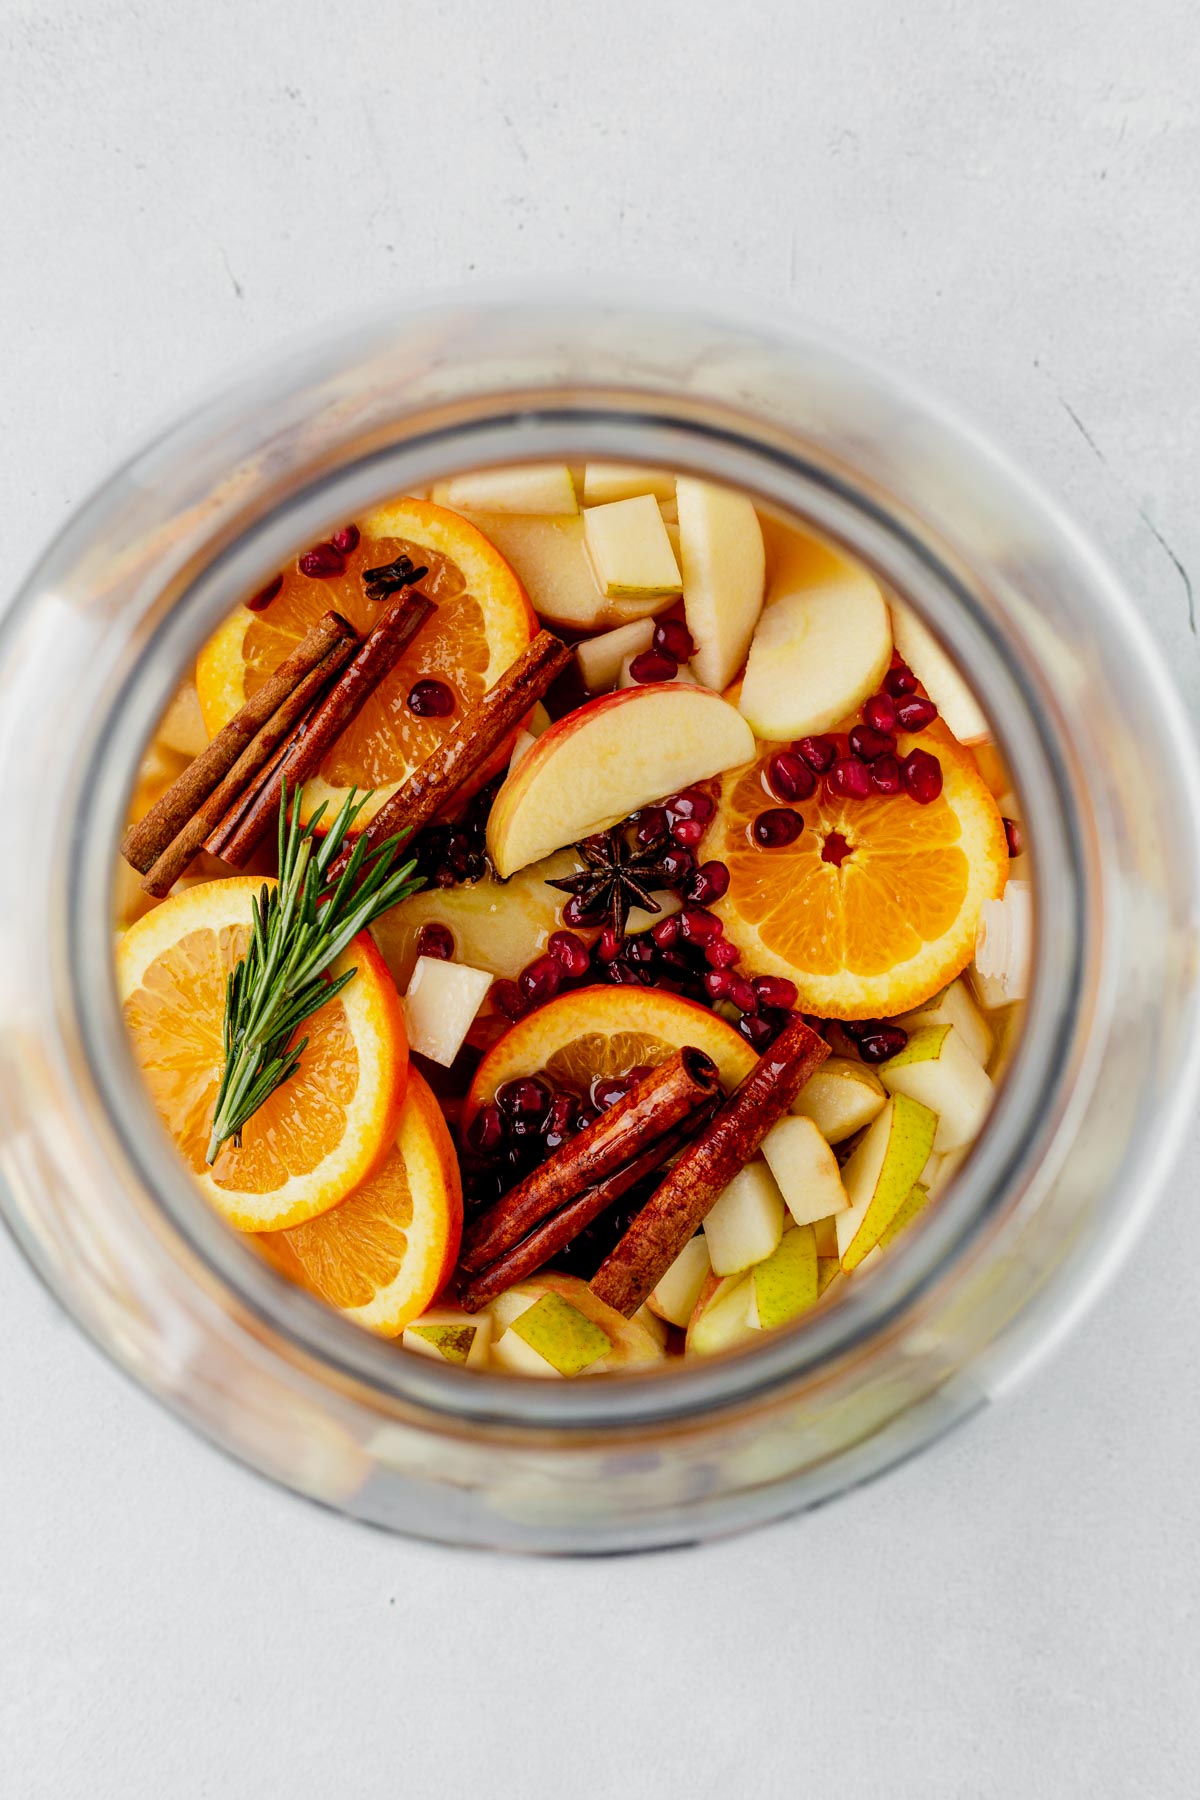 oranges, cinnamone sticks, rosemary and apples in a pitcher